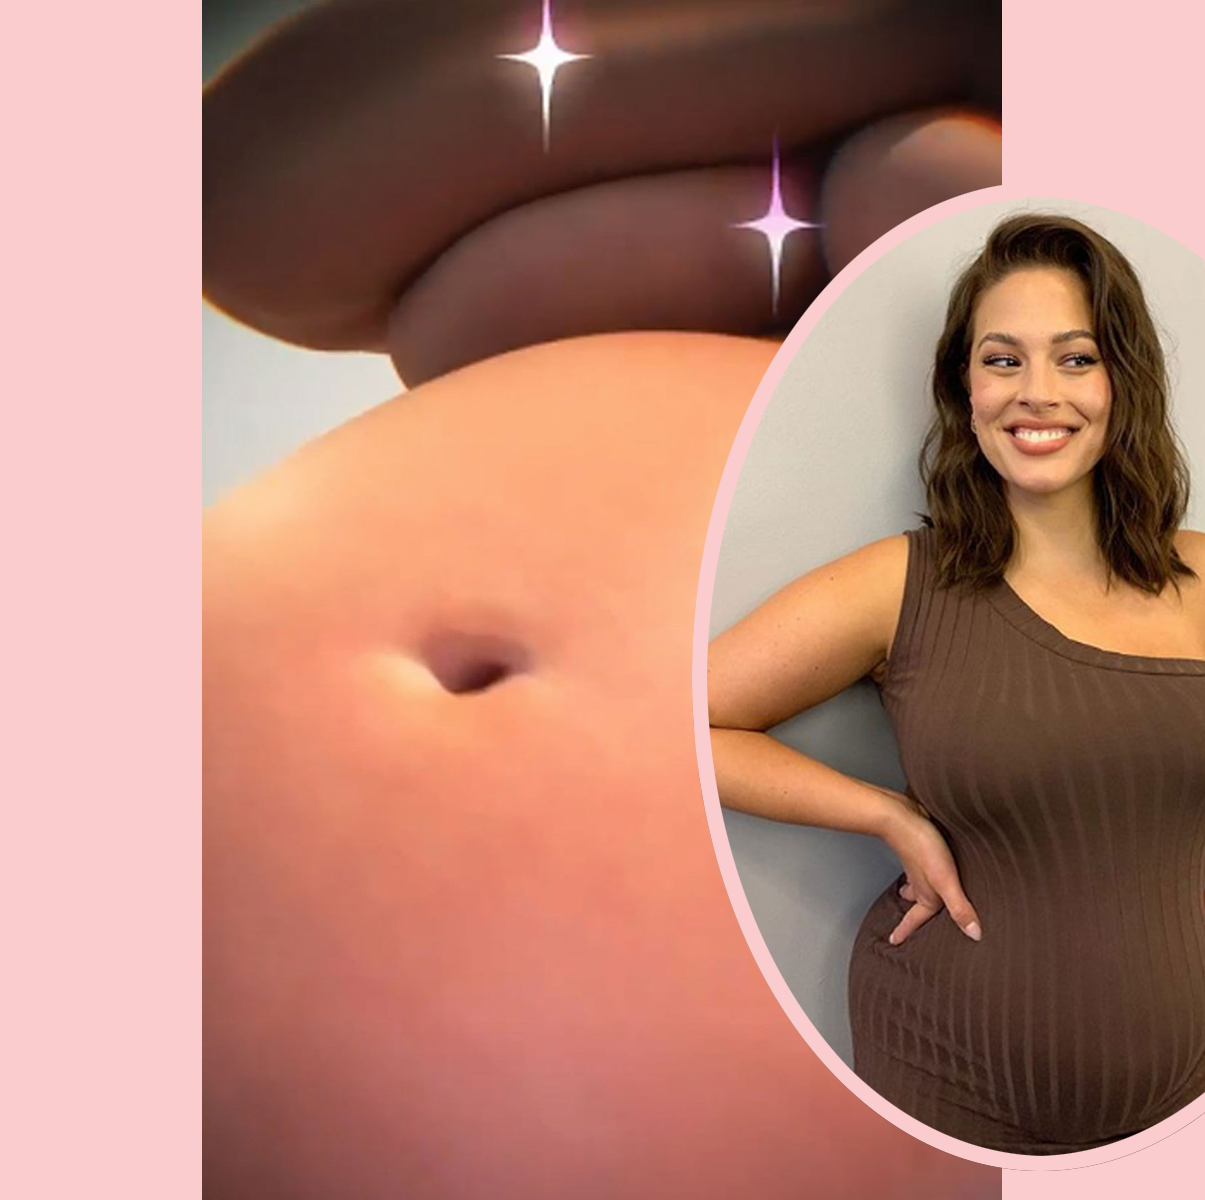 Plus Size Pregnant Nude Videos - Pregnant Ashley Graham Bares Her Body & Baby Bump In Naked Selfie Video! -  Perez Hilton